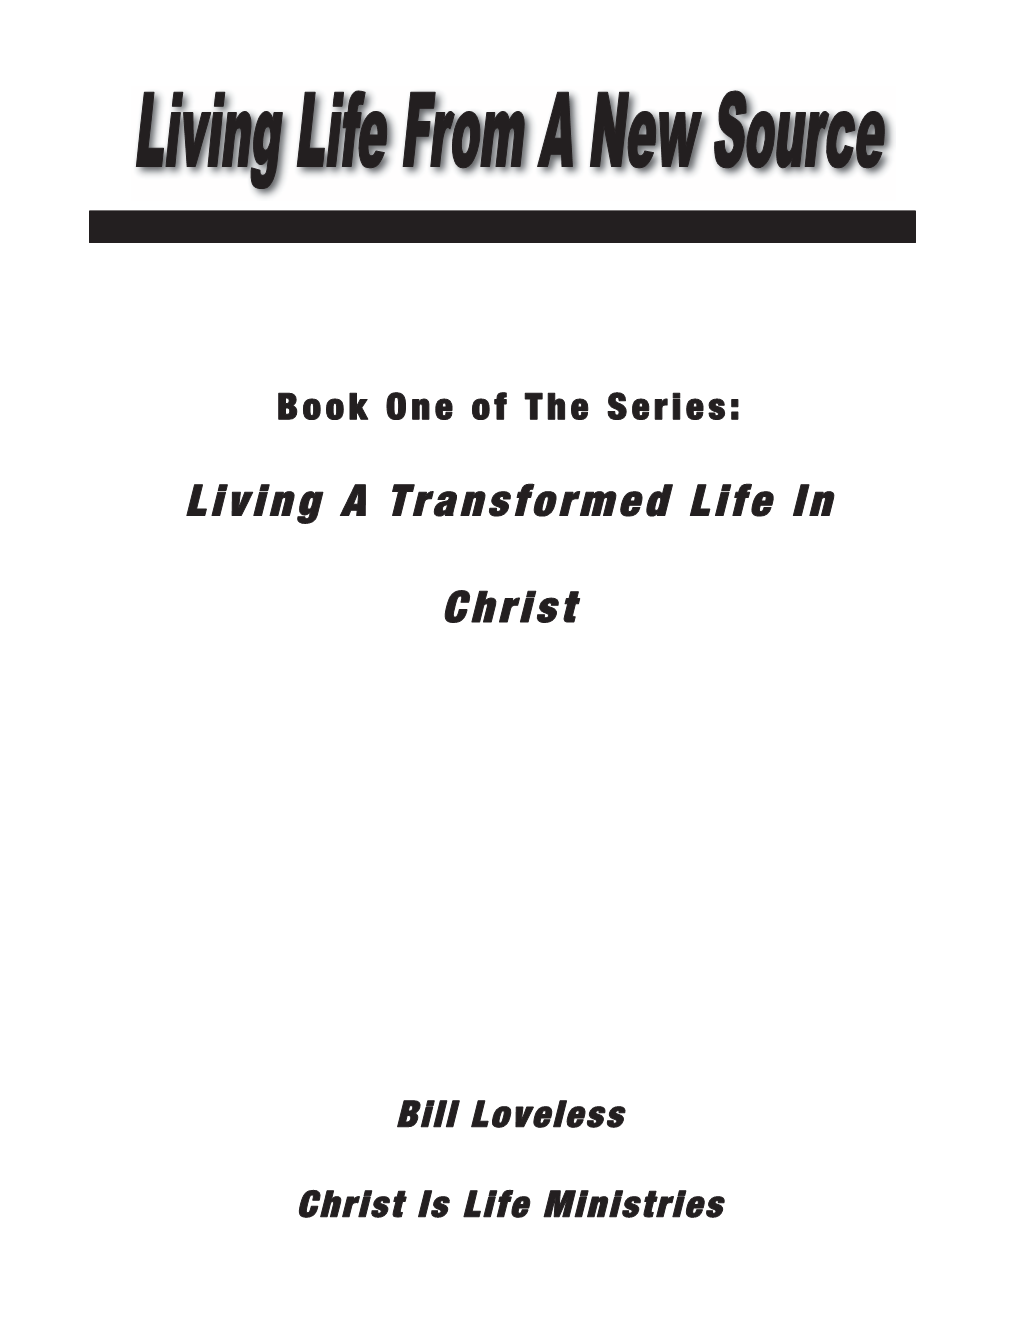 Living a Transformed Life in Christ